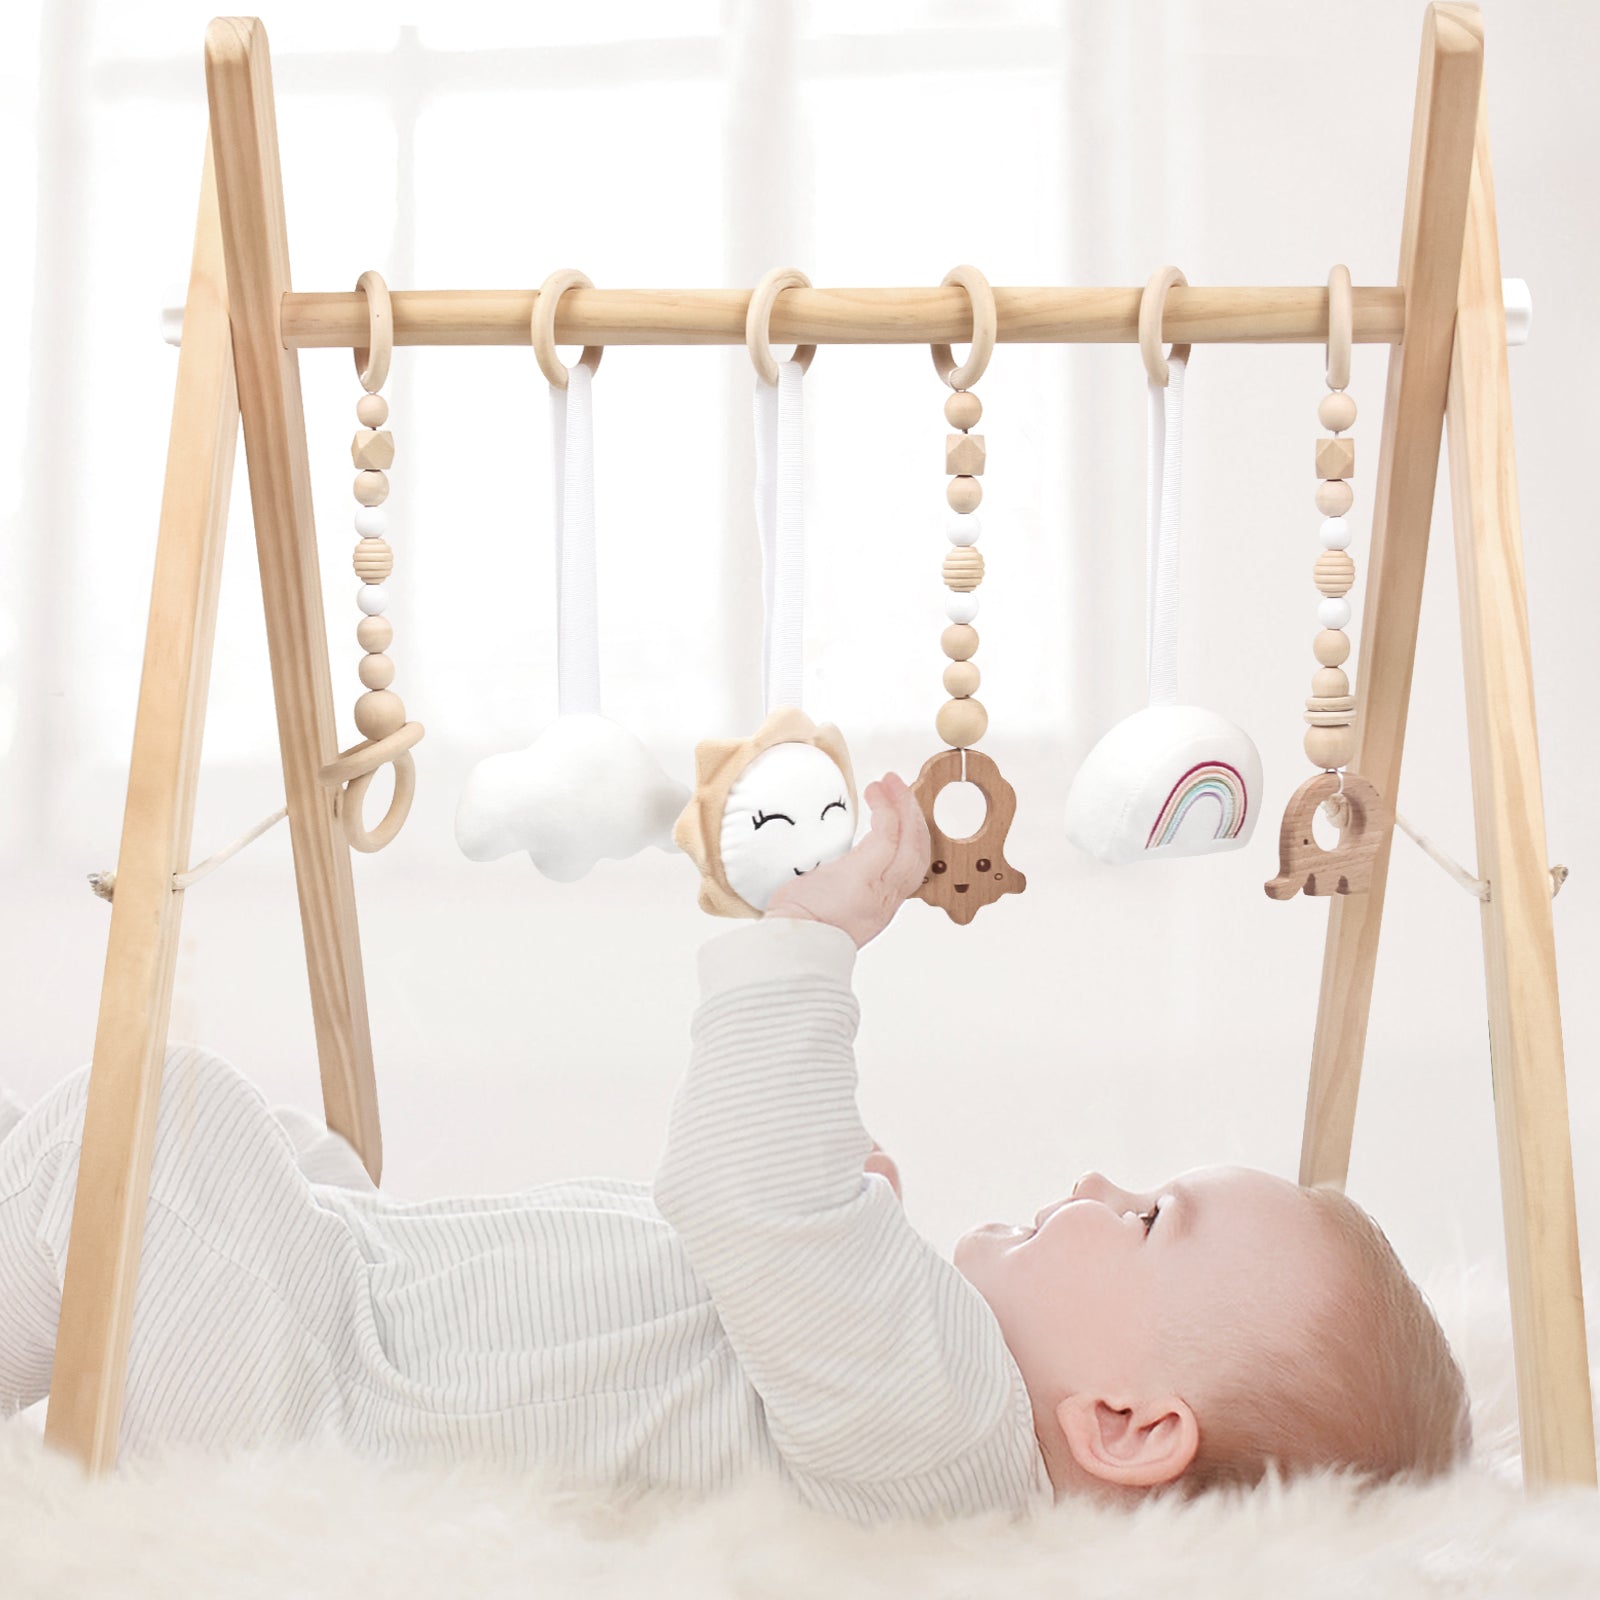 Wooden Foldable Baby Gym (Natural Wood)